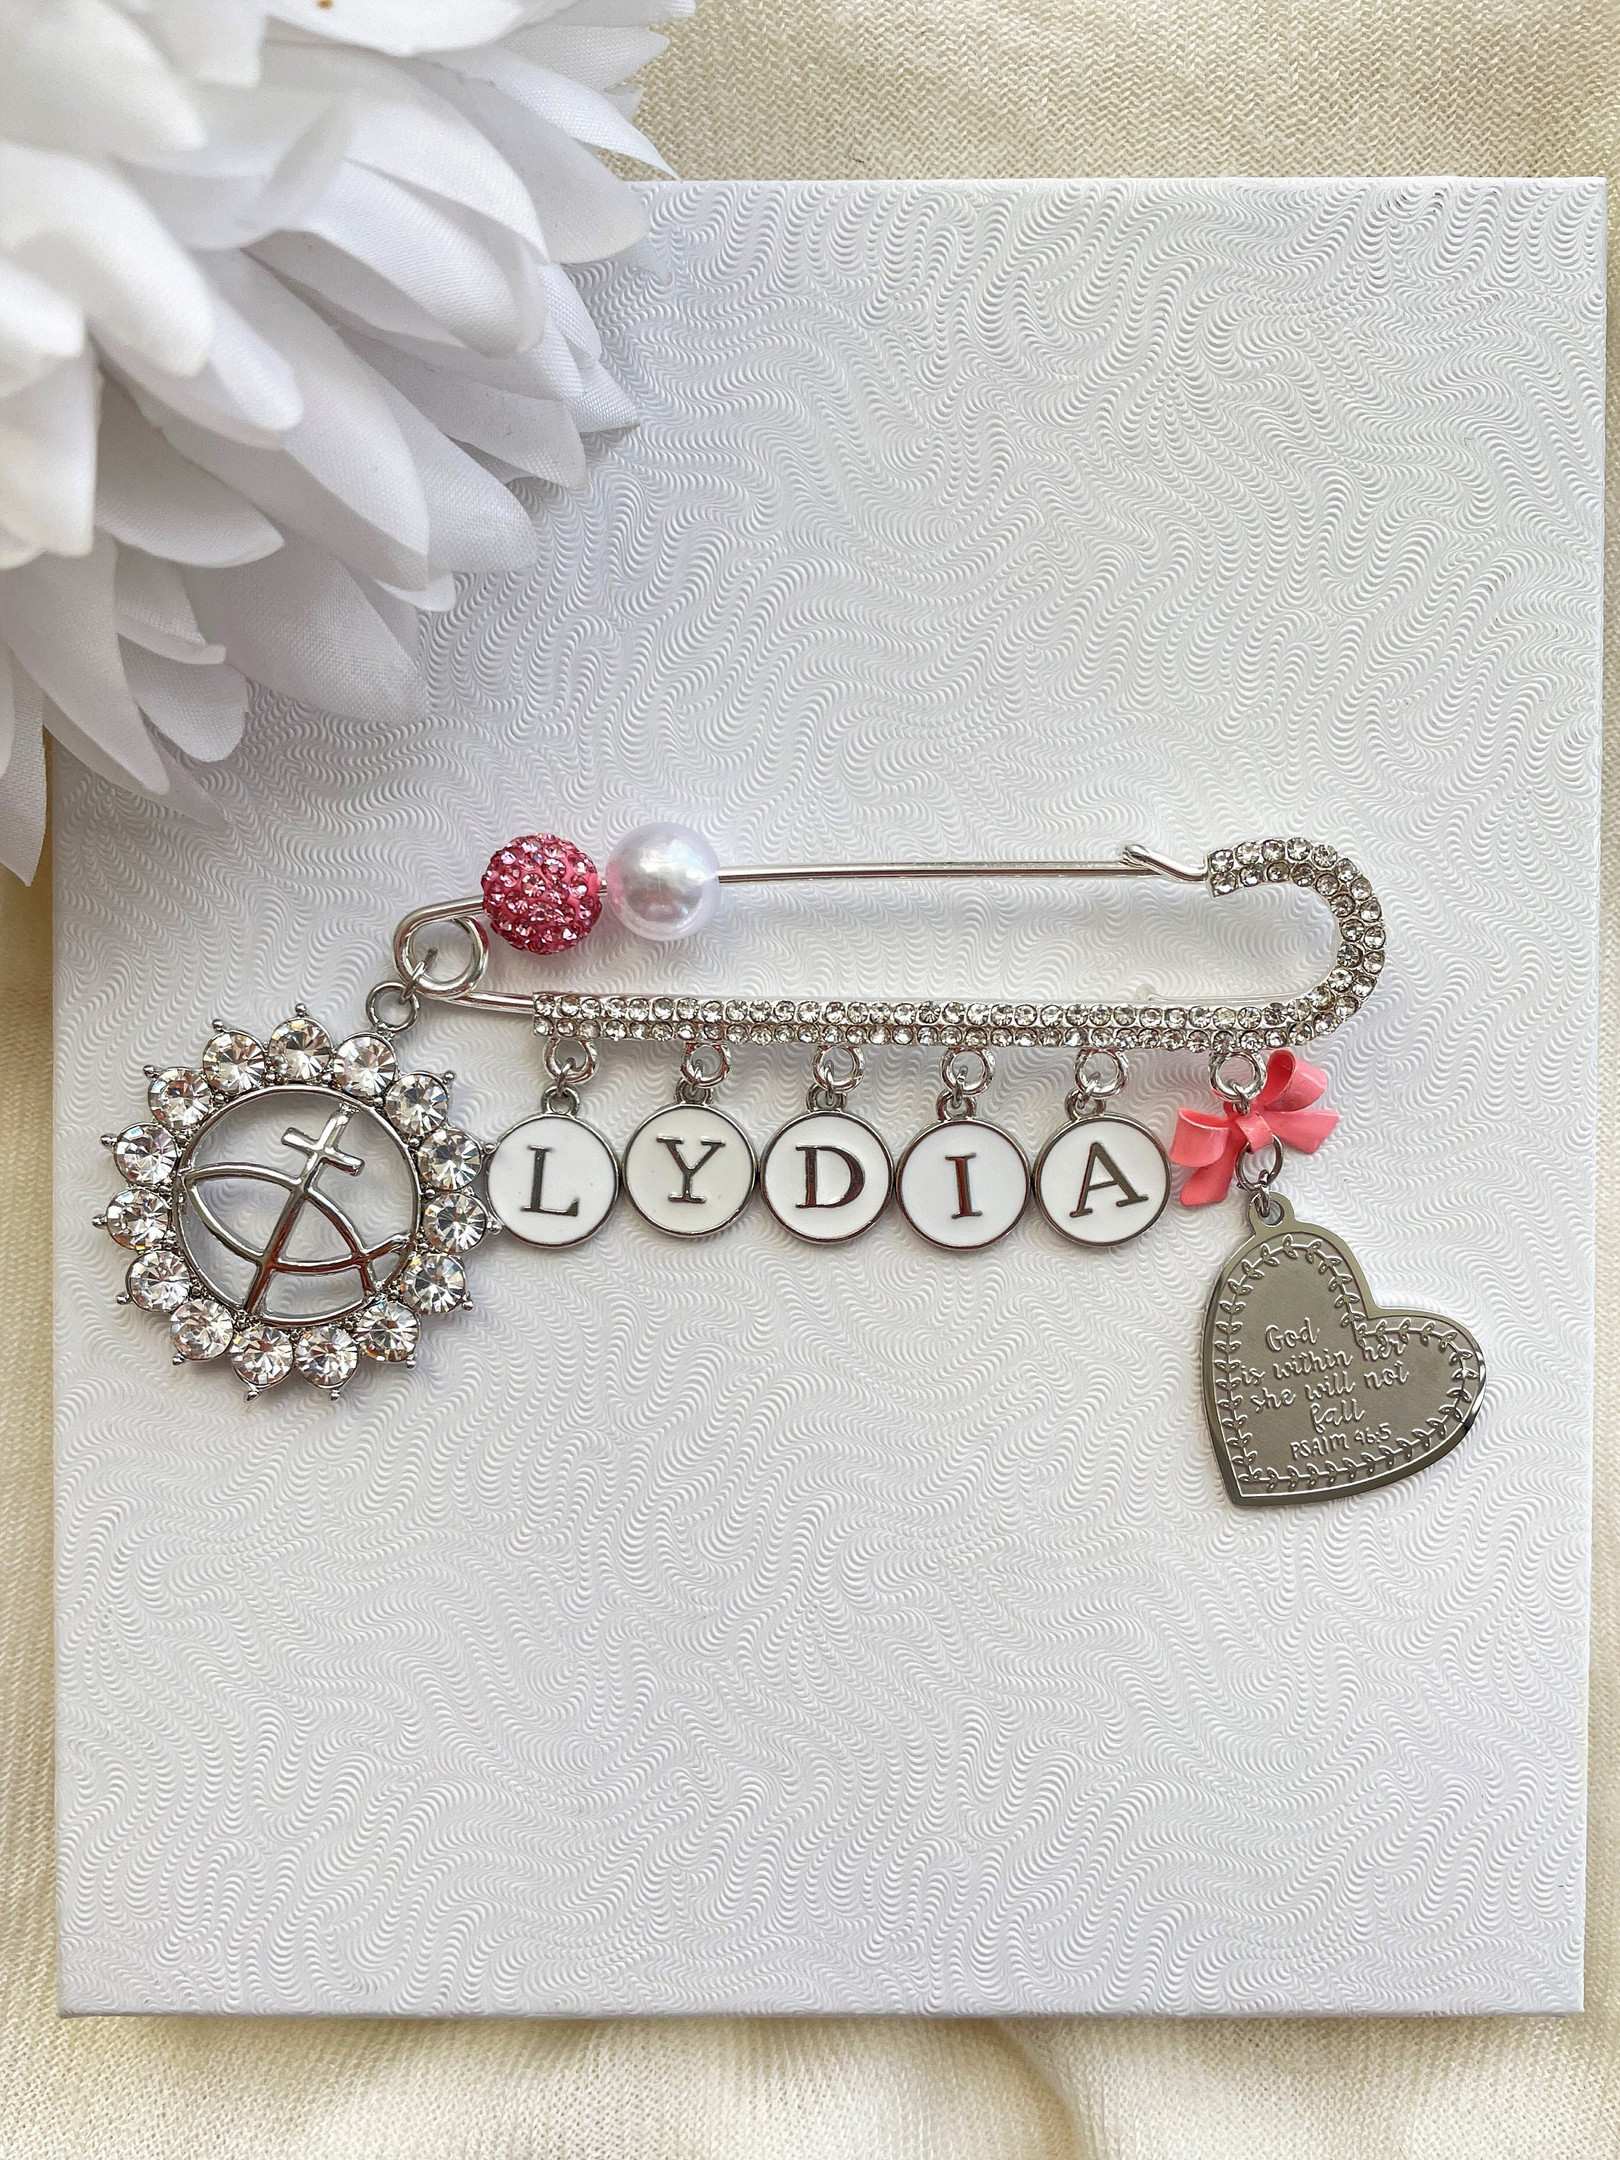 Custom Silver & Rhinestone Pin with 5-Letter Name in Silver Letters, Accents, and Bible Charms, Baby and Celebration Gift - Blue or Pink